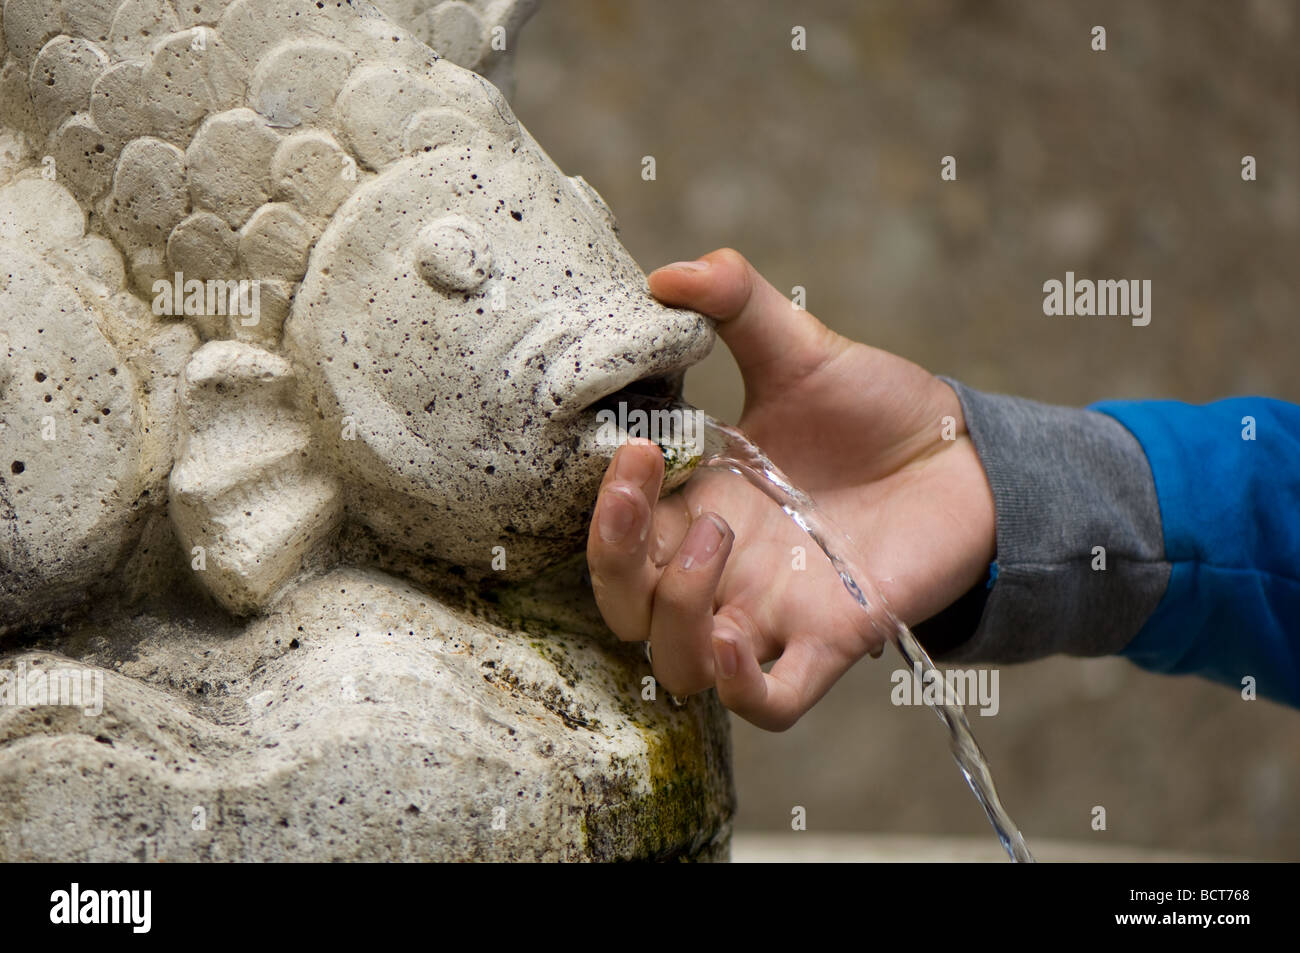 Boys hand feeling the cool spring fresh water from a drinking fountain. Stock Photo